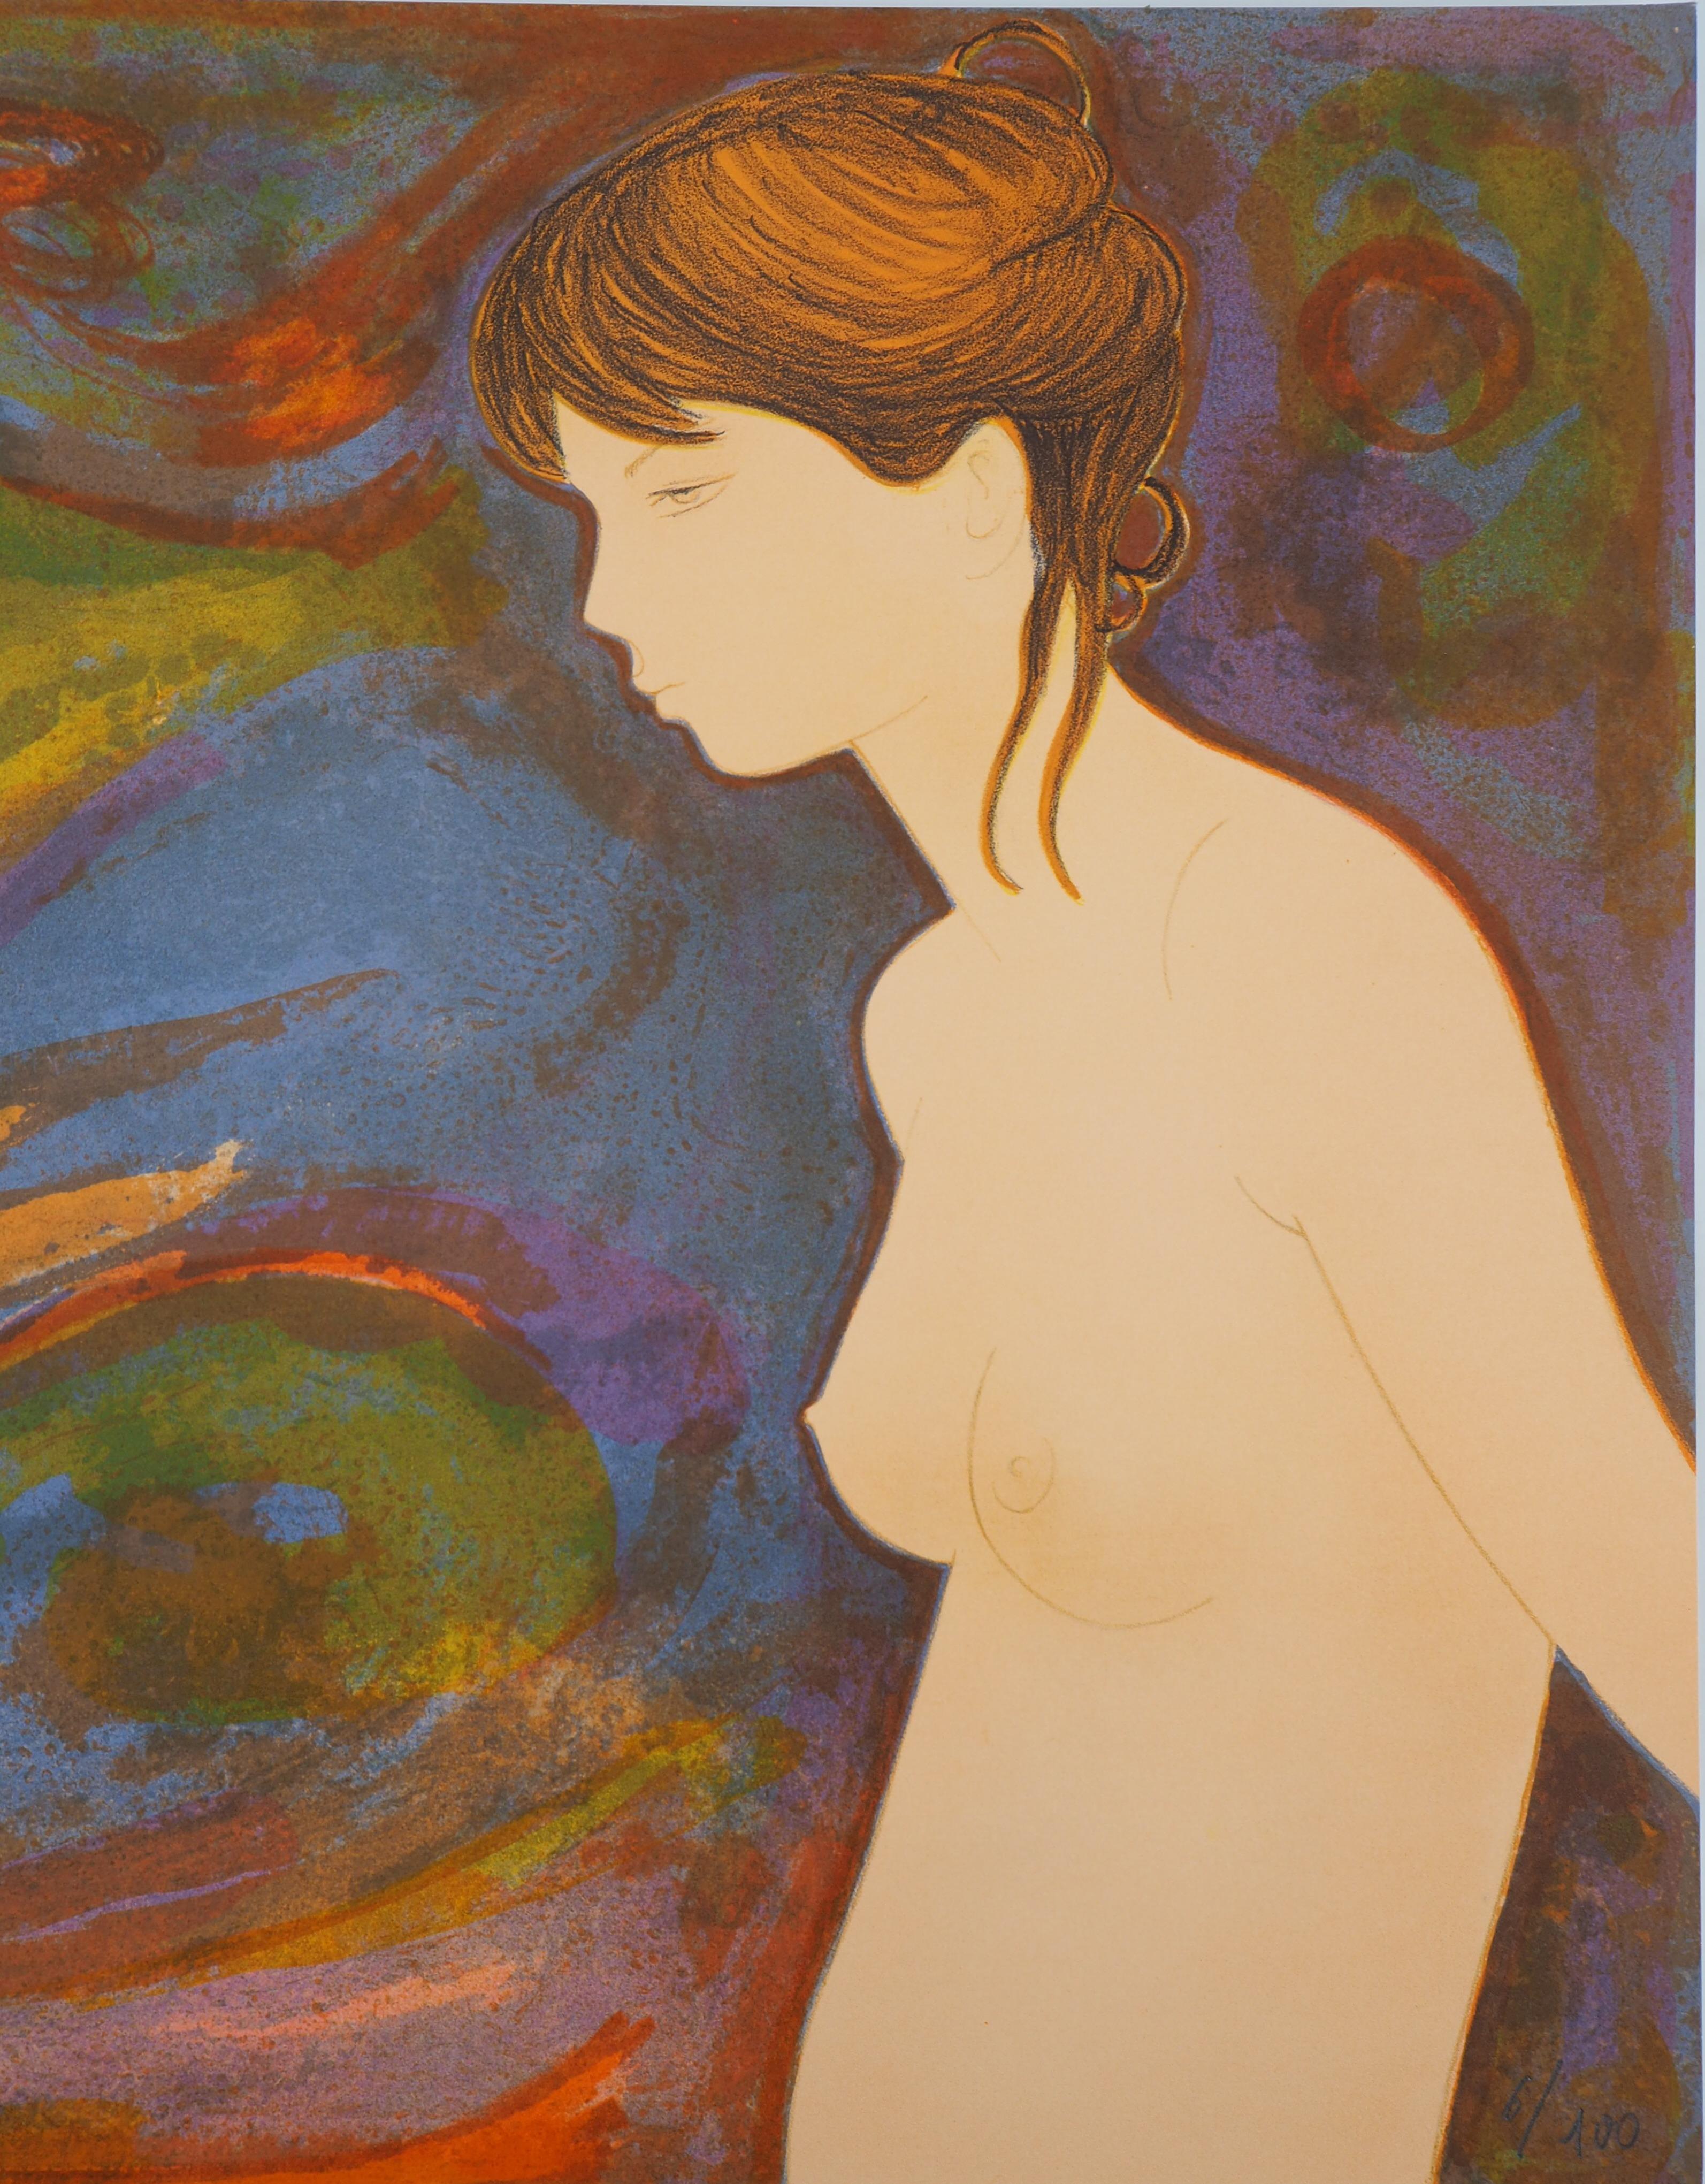 Beauty in a Dream - Original lithograph, Handsigned and Numbered /100 - Modern Print by Alain Bonnefoit